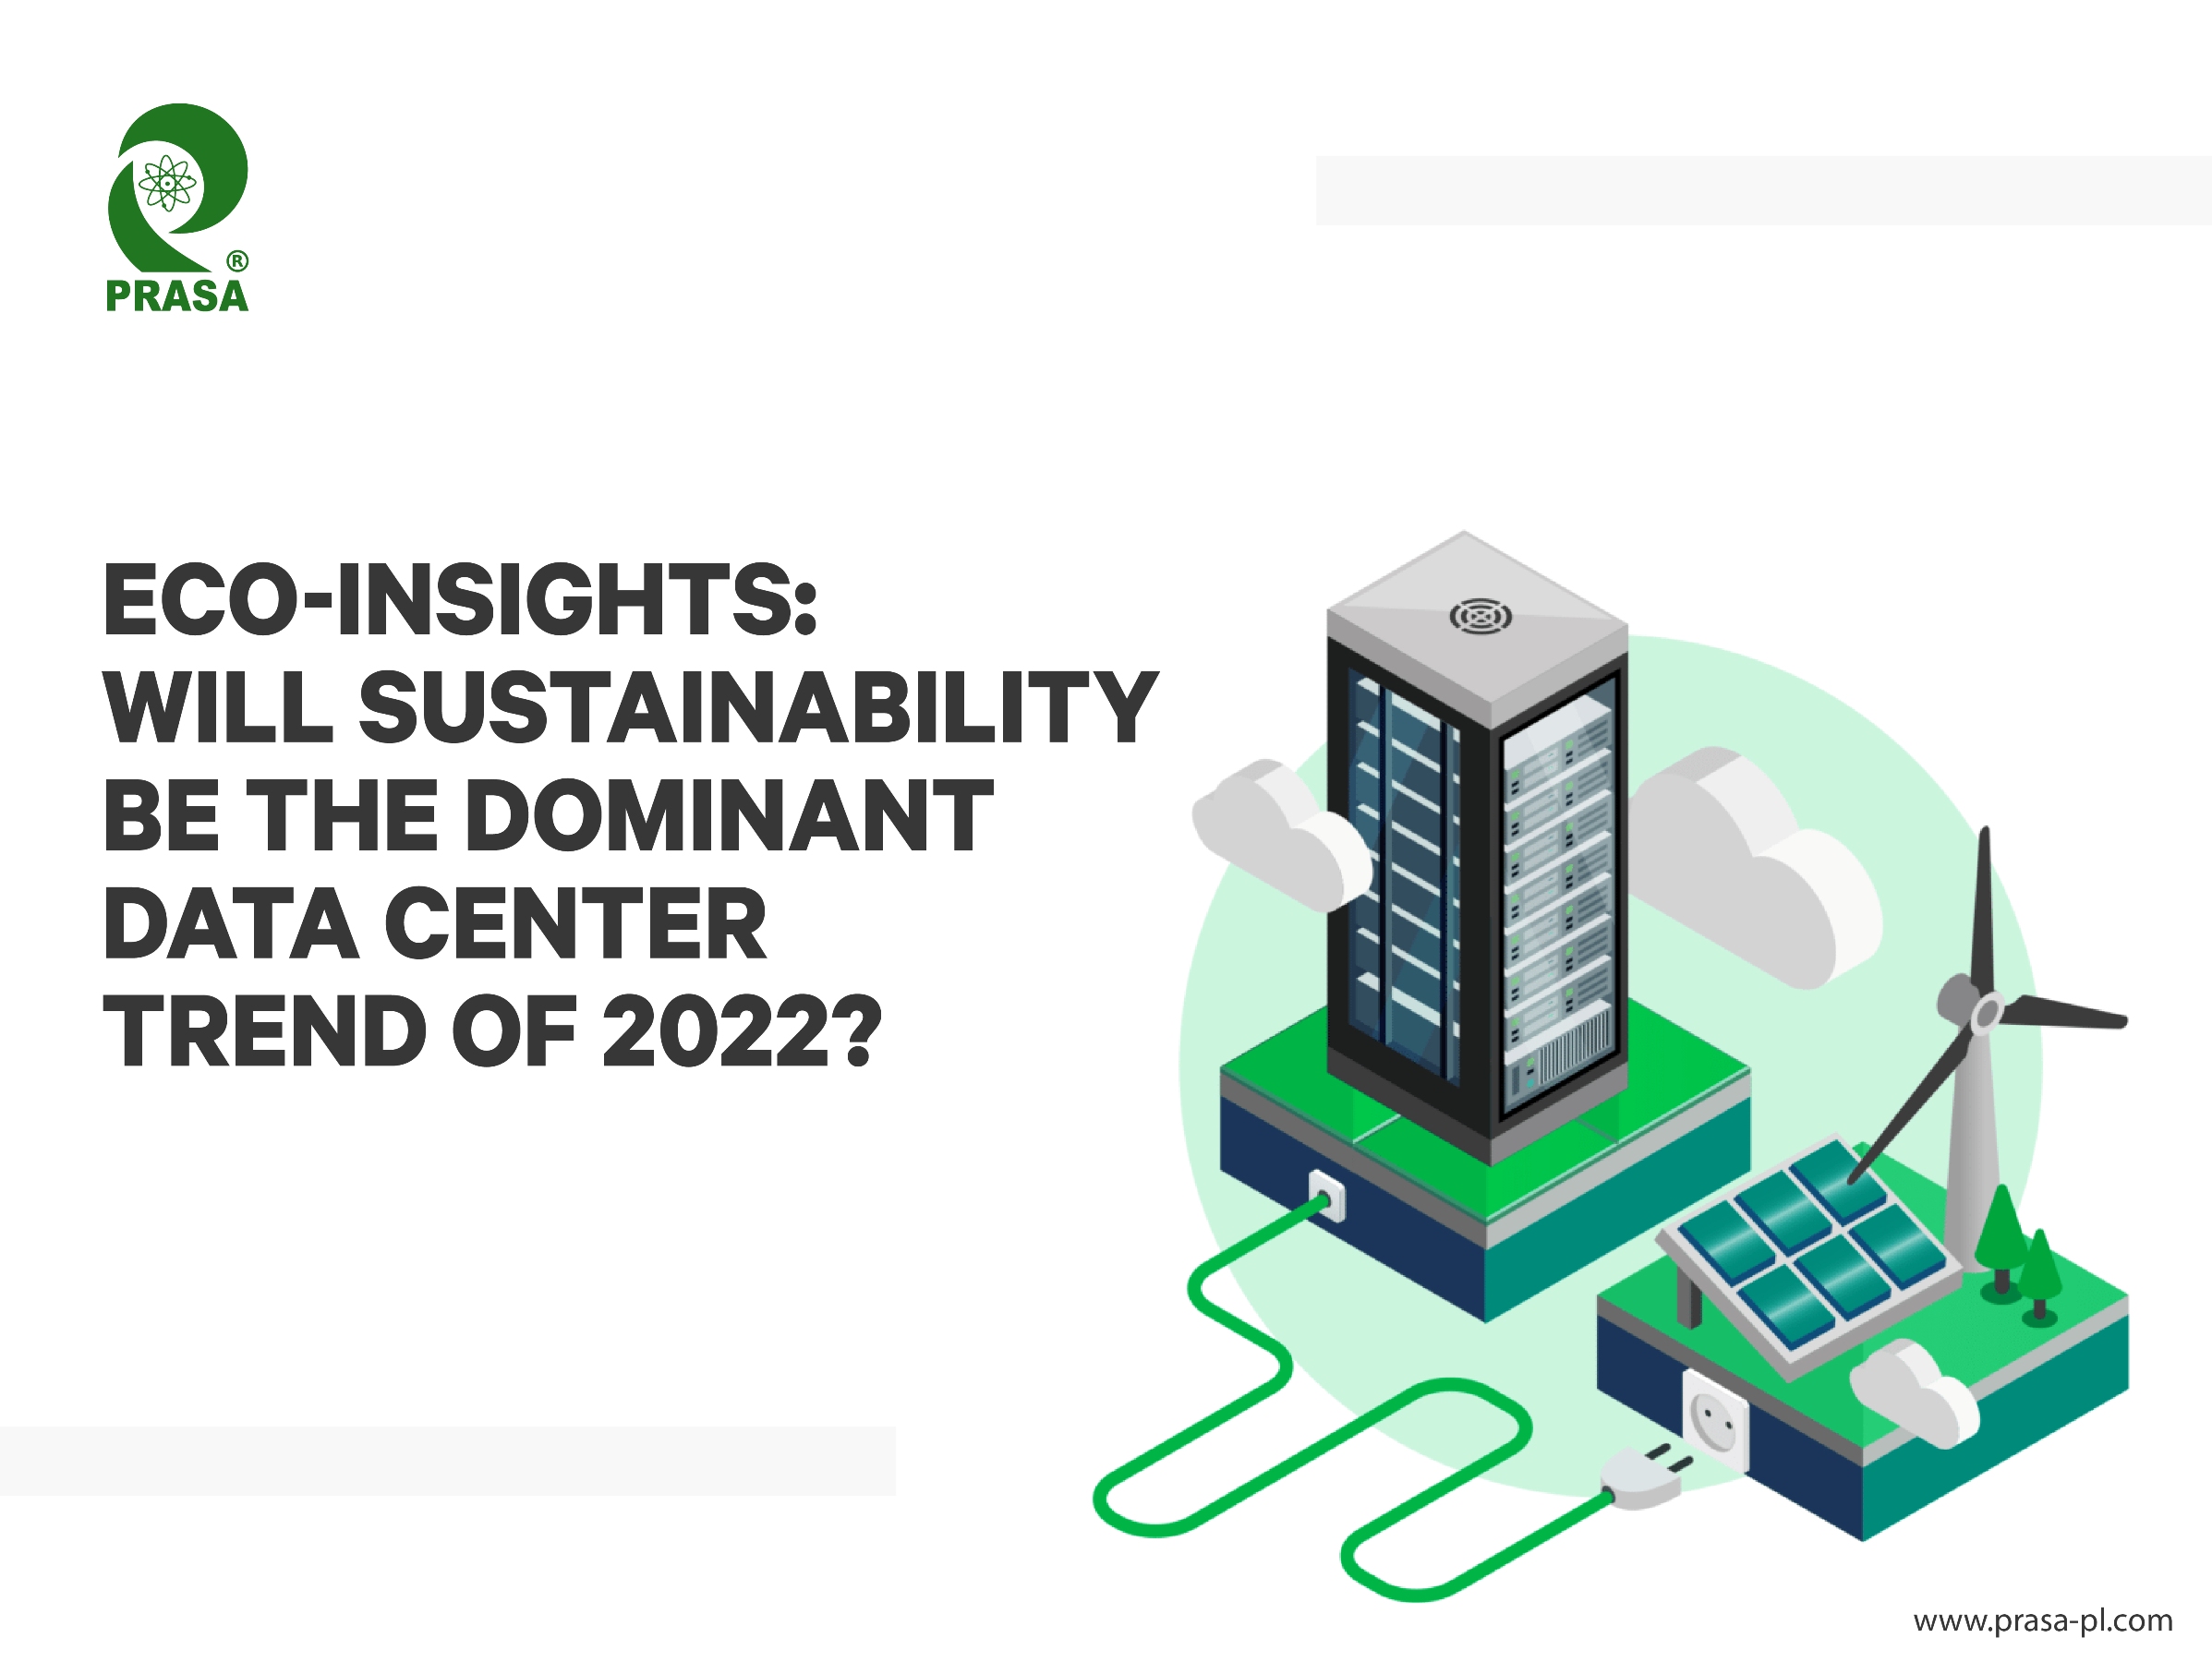 Eco-Insights: Will Sustainability Be the Dominant Data Center Trend of 2022?